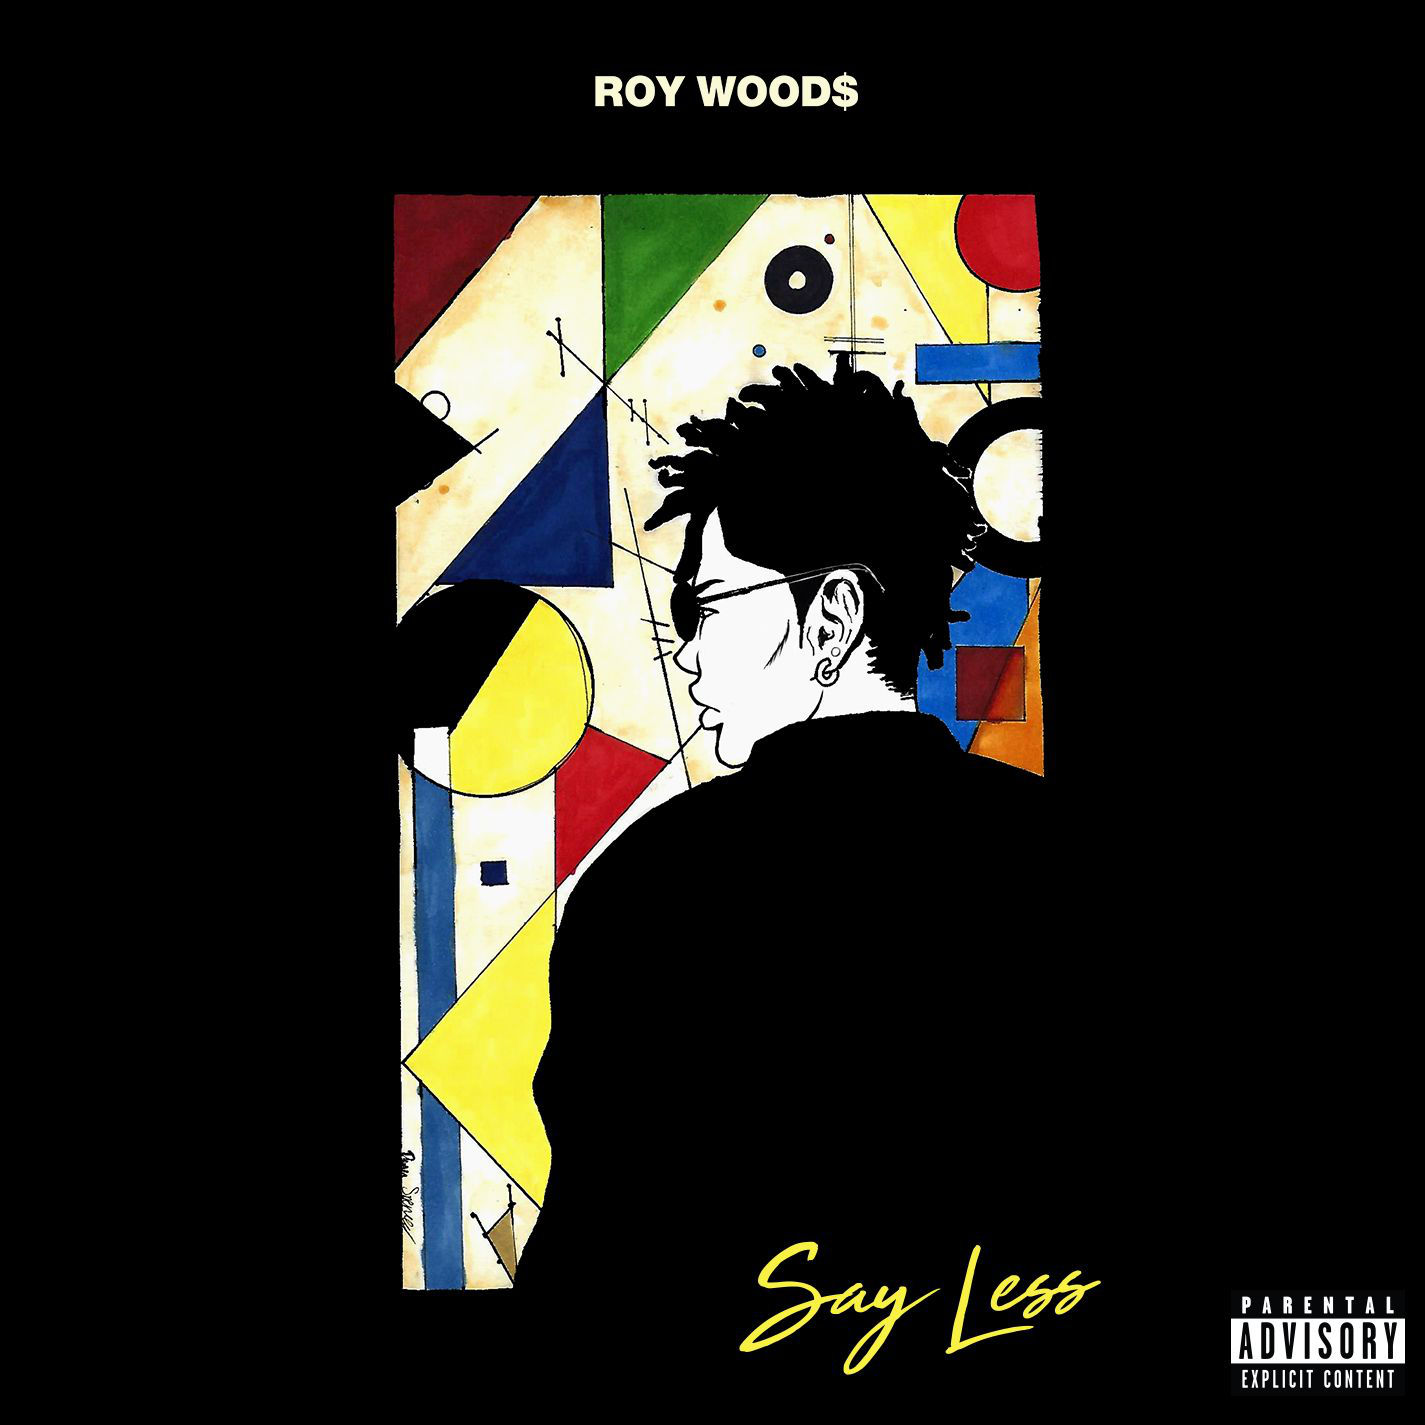 Our review of 'Say Less' by Roy woods